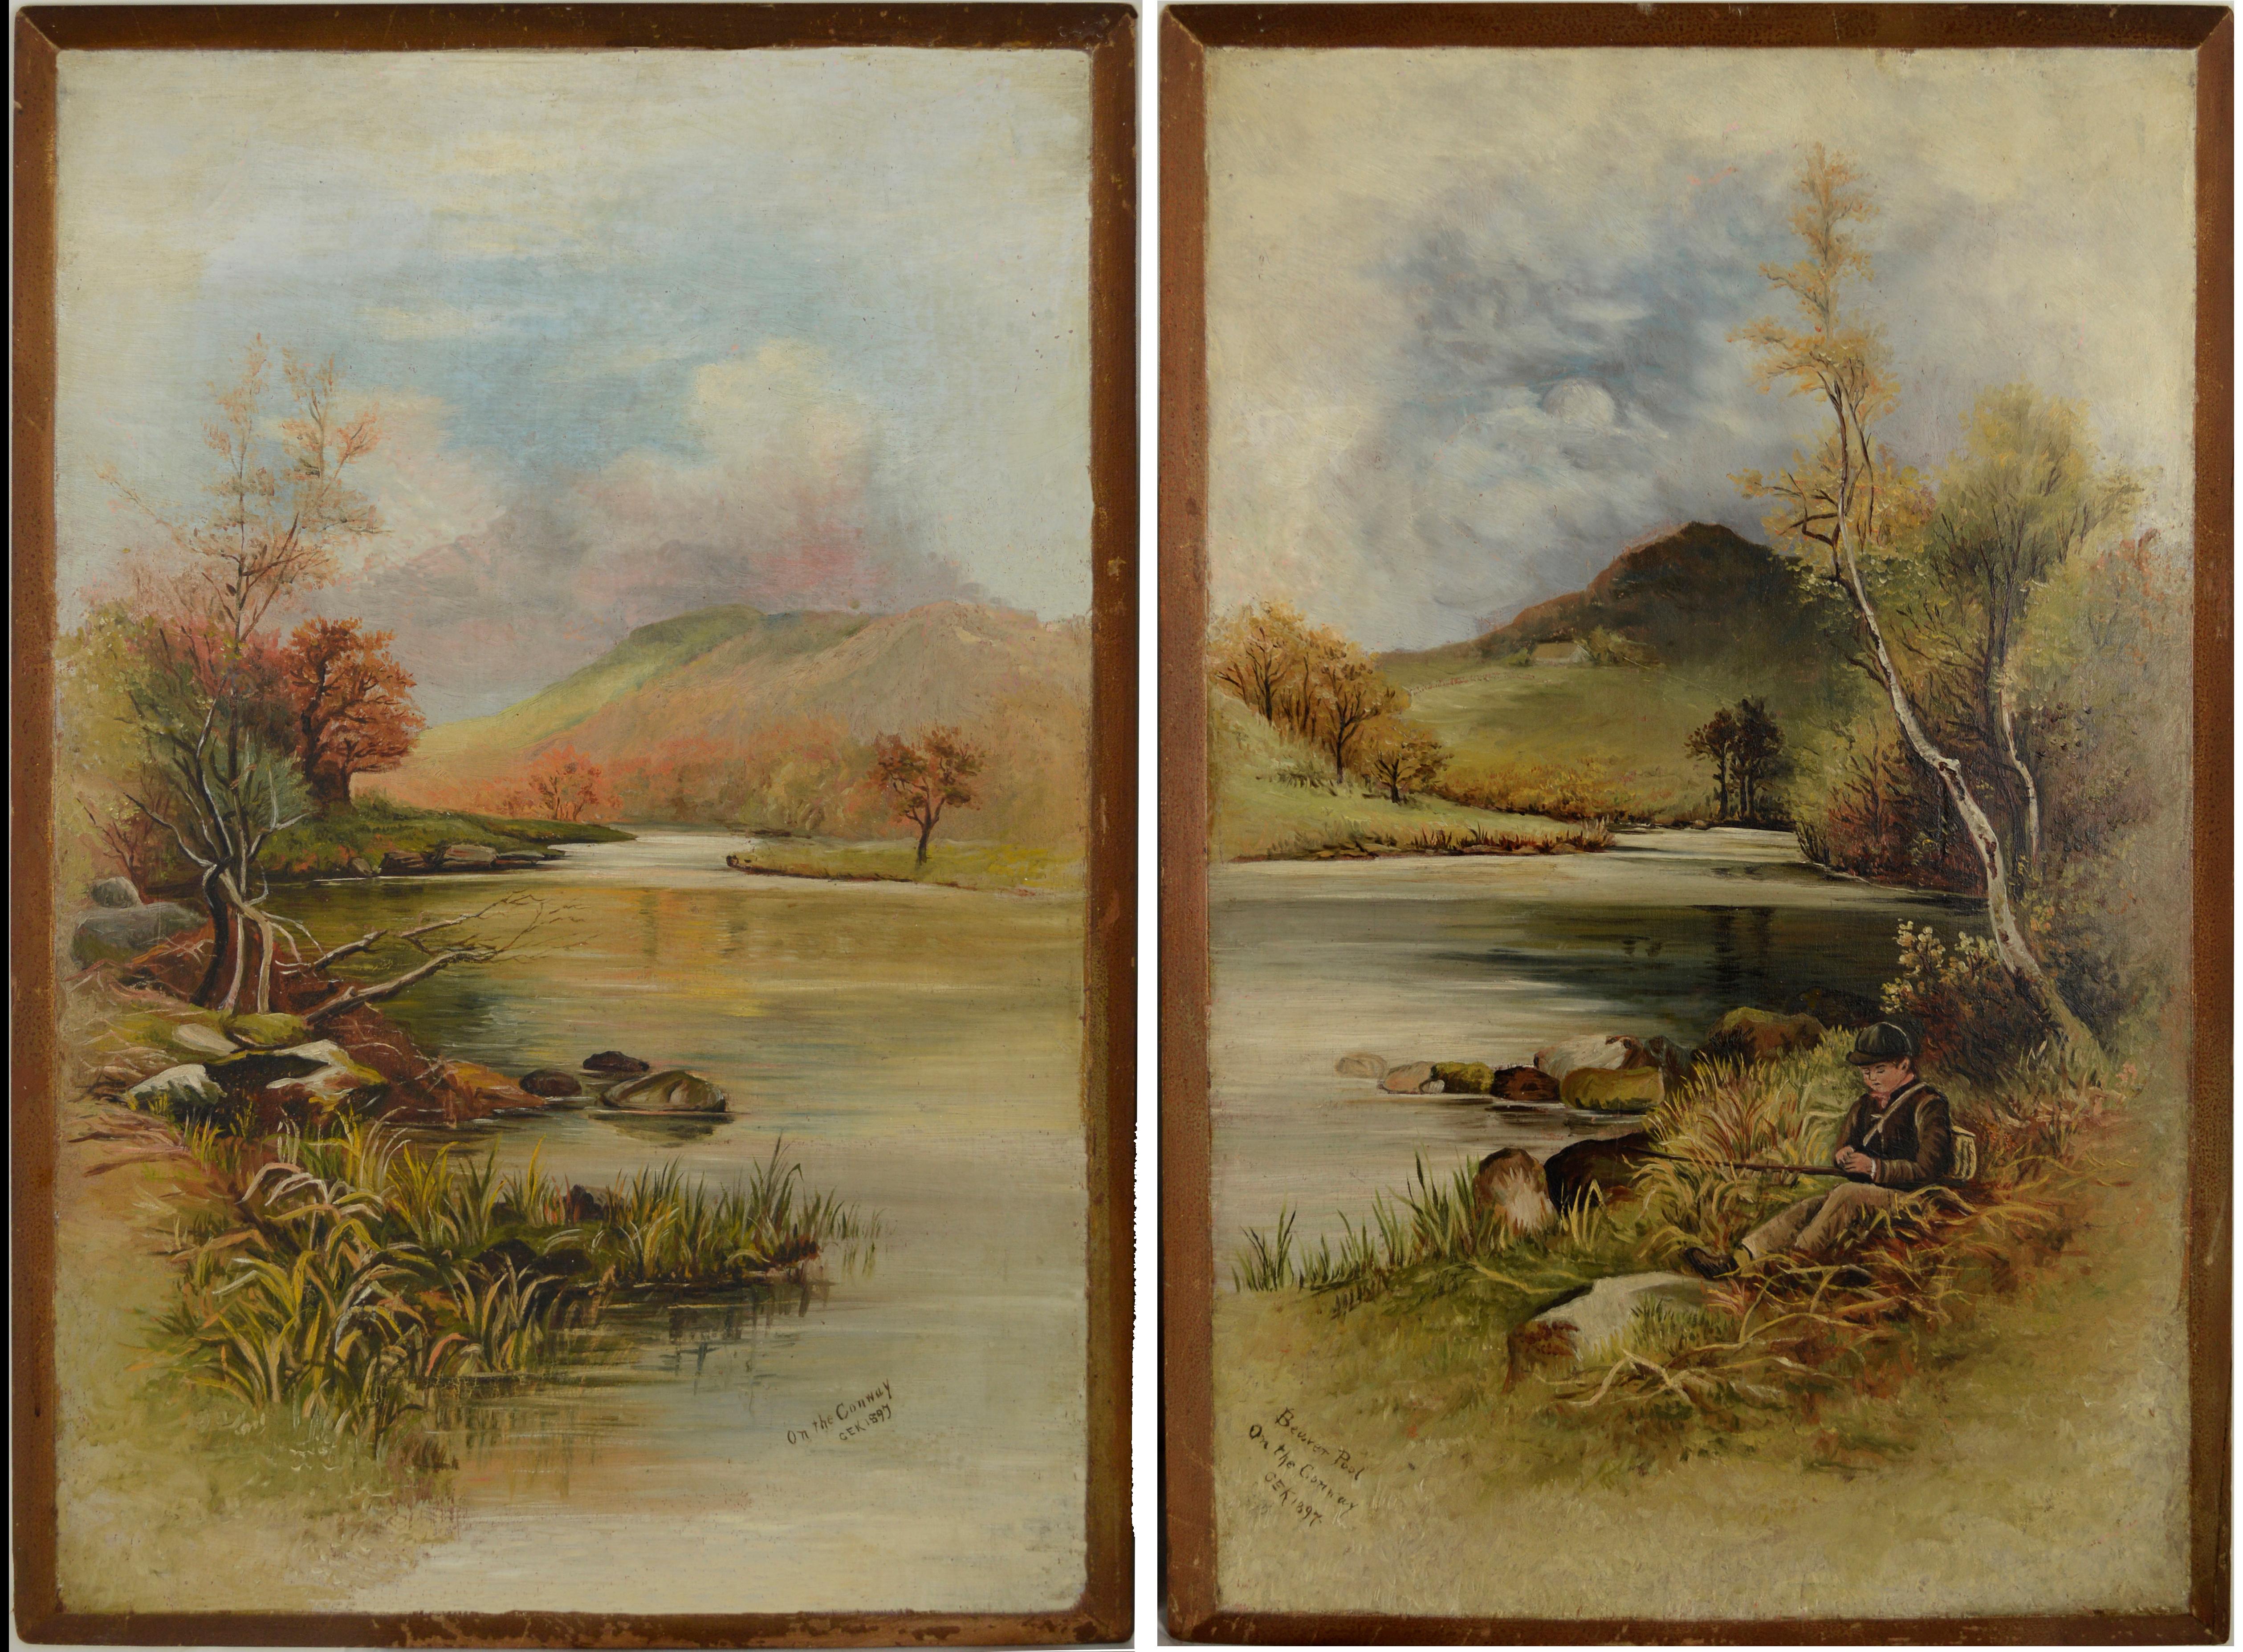 GEK Landscape Painting - Two Early Massachusetts Paintings Boy fishing "Beaver Pool" - "The Conway" 1897